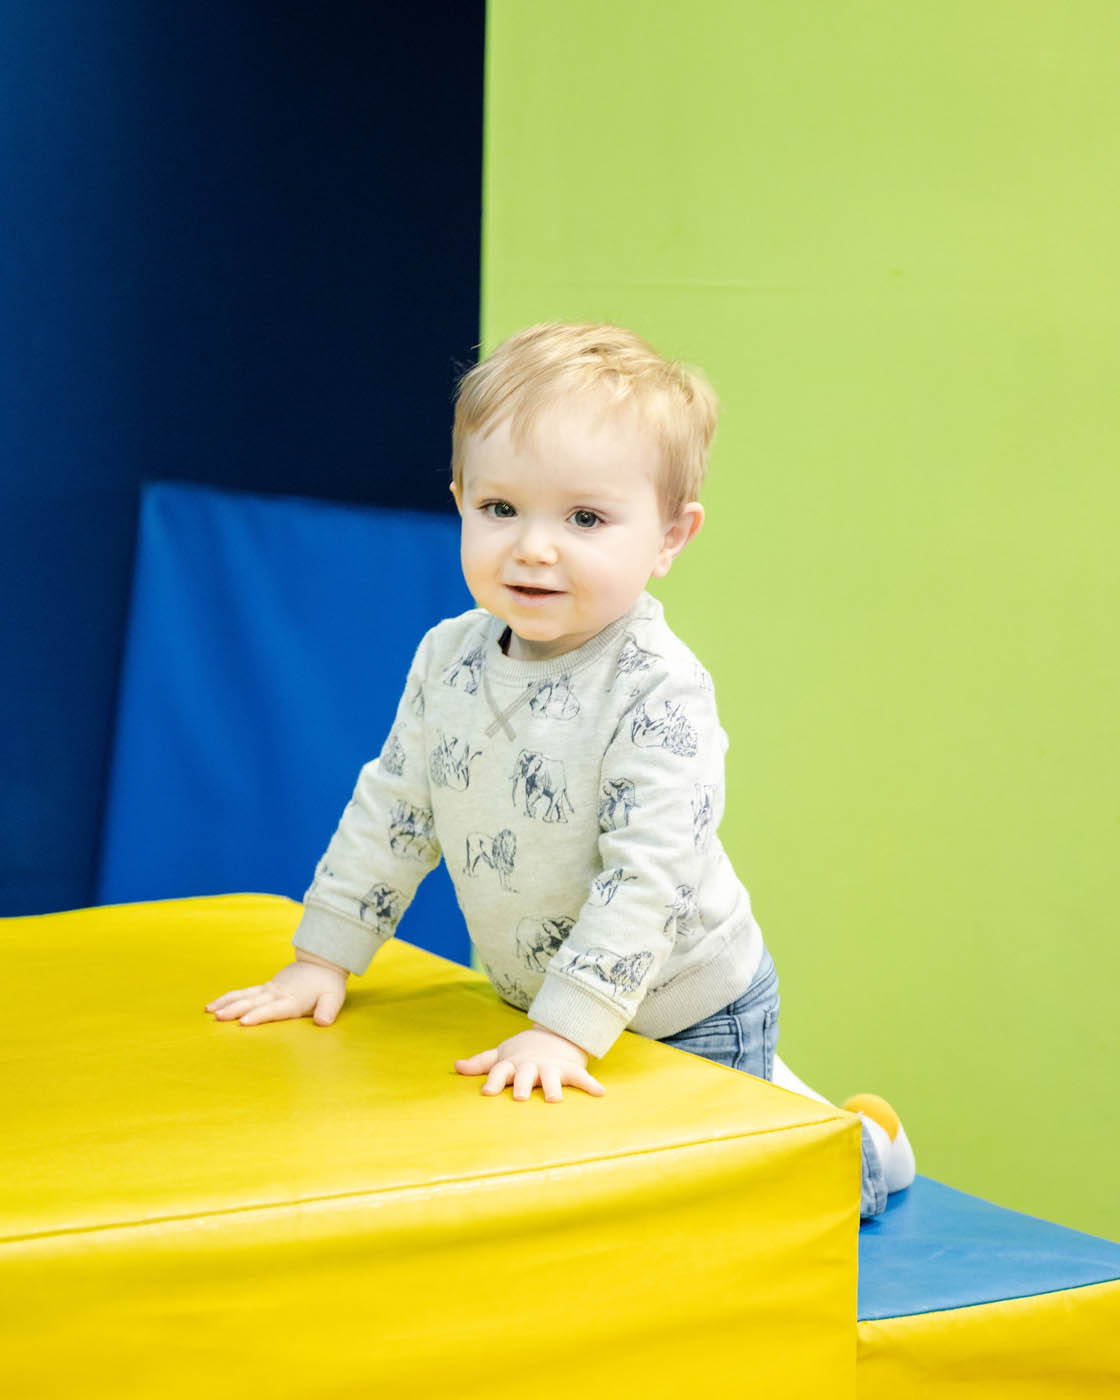 A young boy climbing on some age appropriate gym equipment at a Midlothian toddler tumbling class.